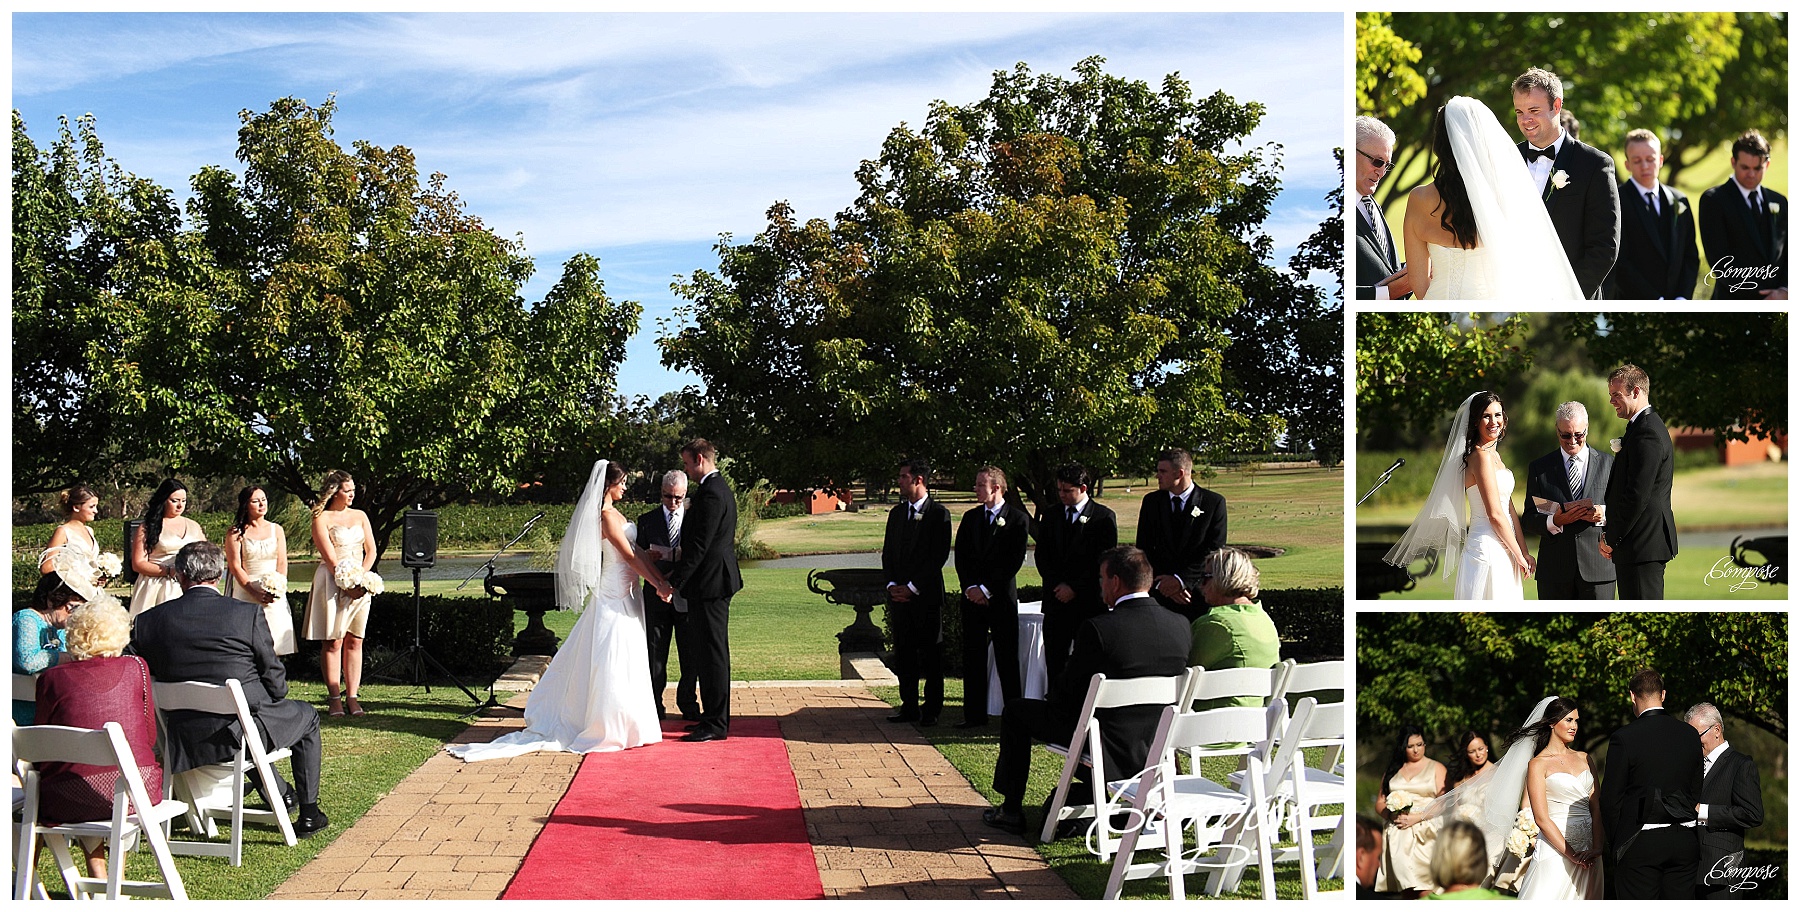 Outdoor wedding ceremony at Sandalford 